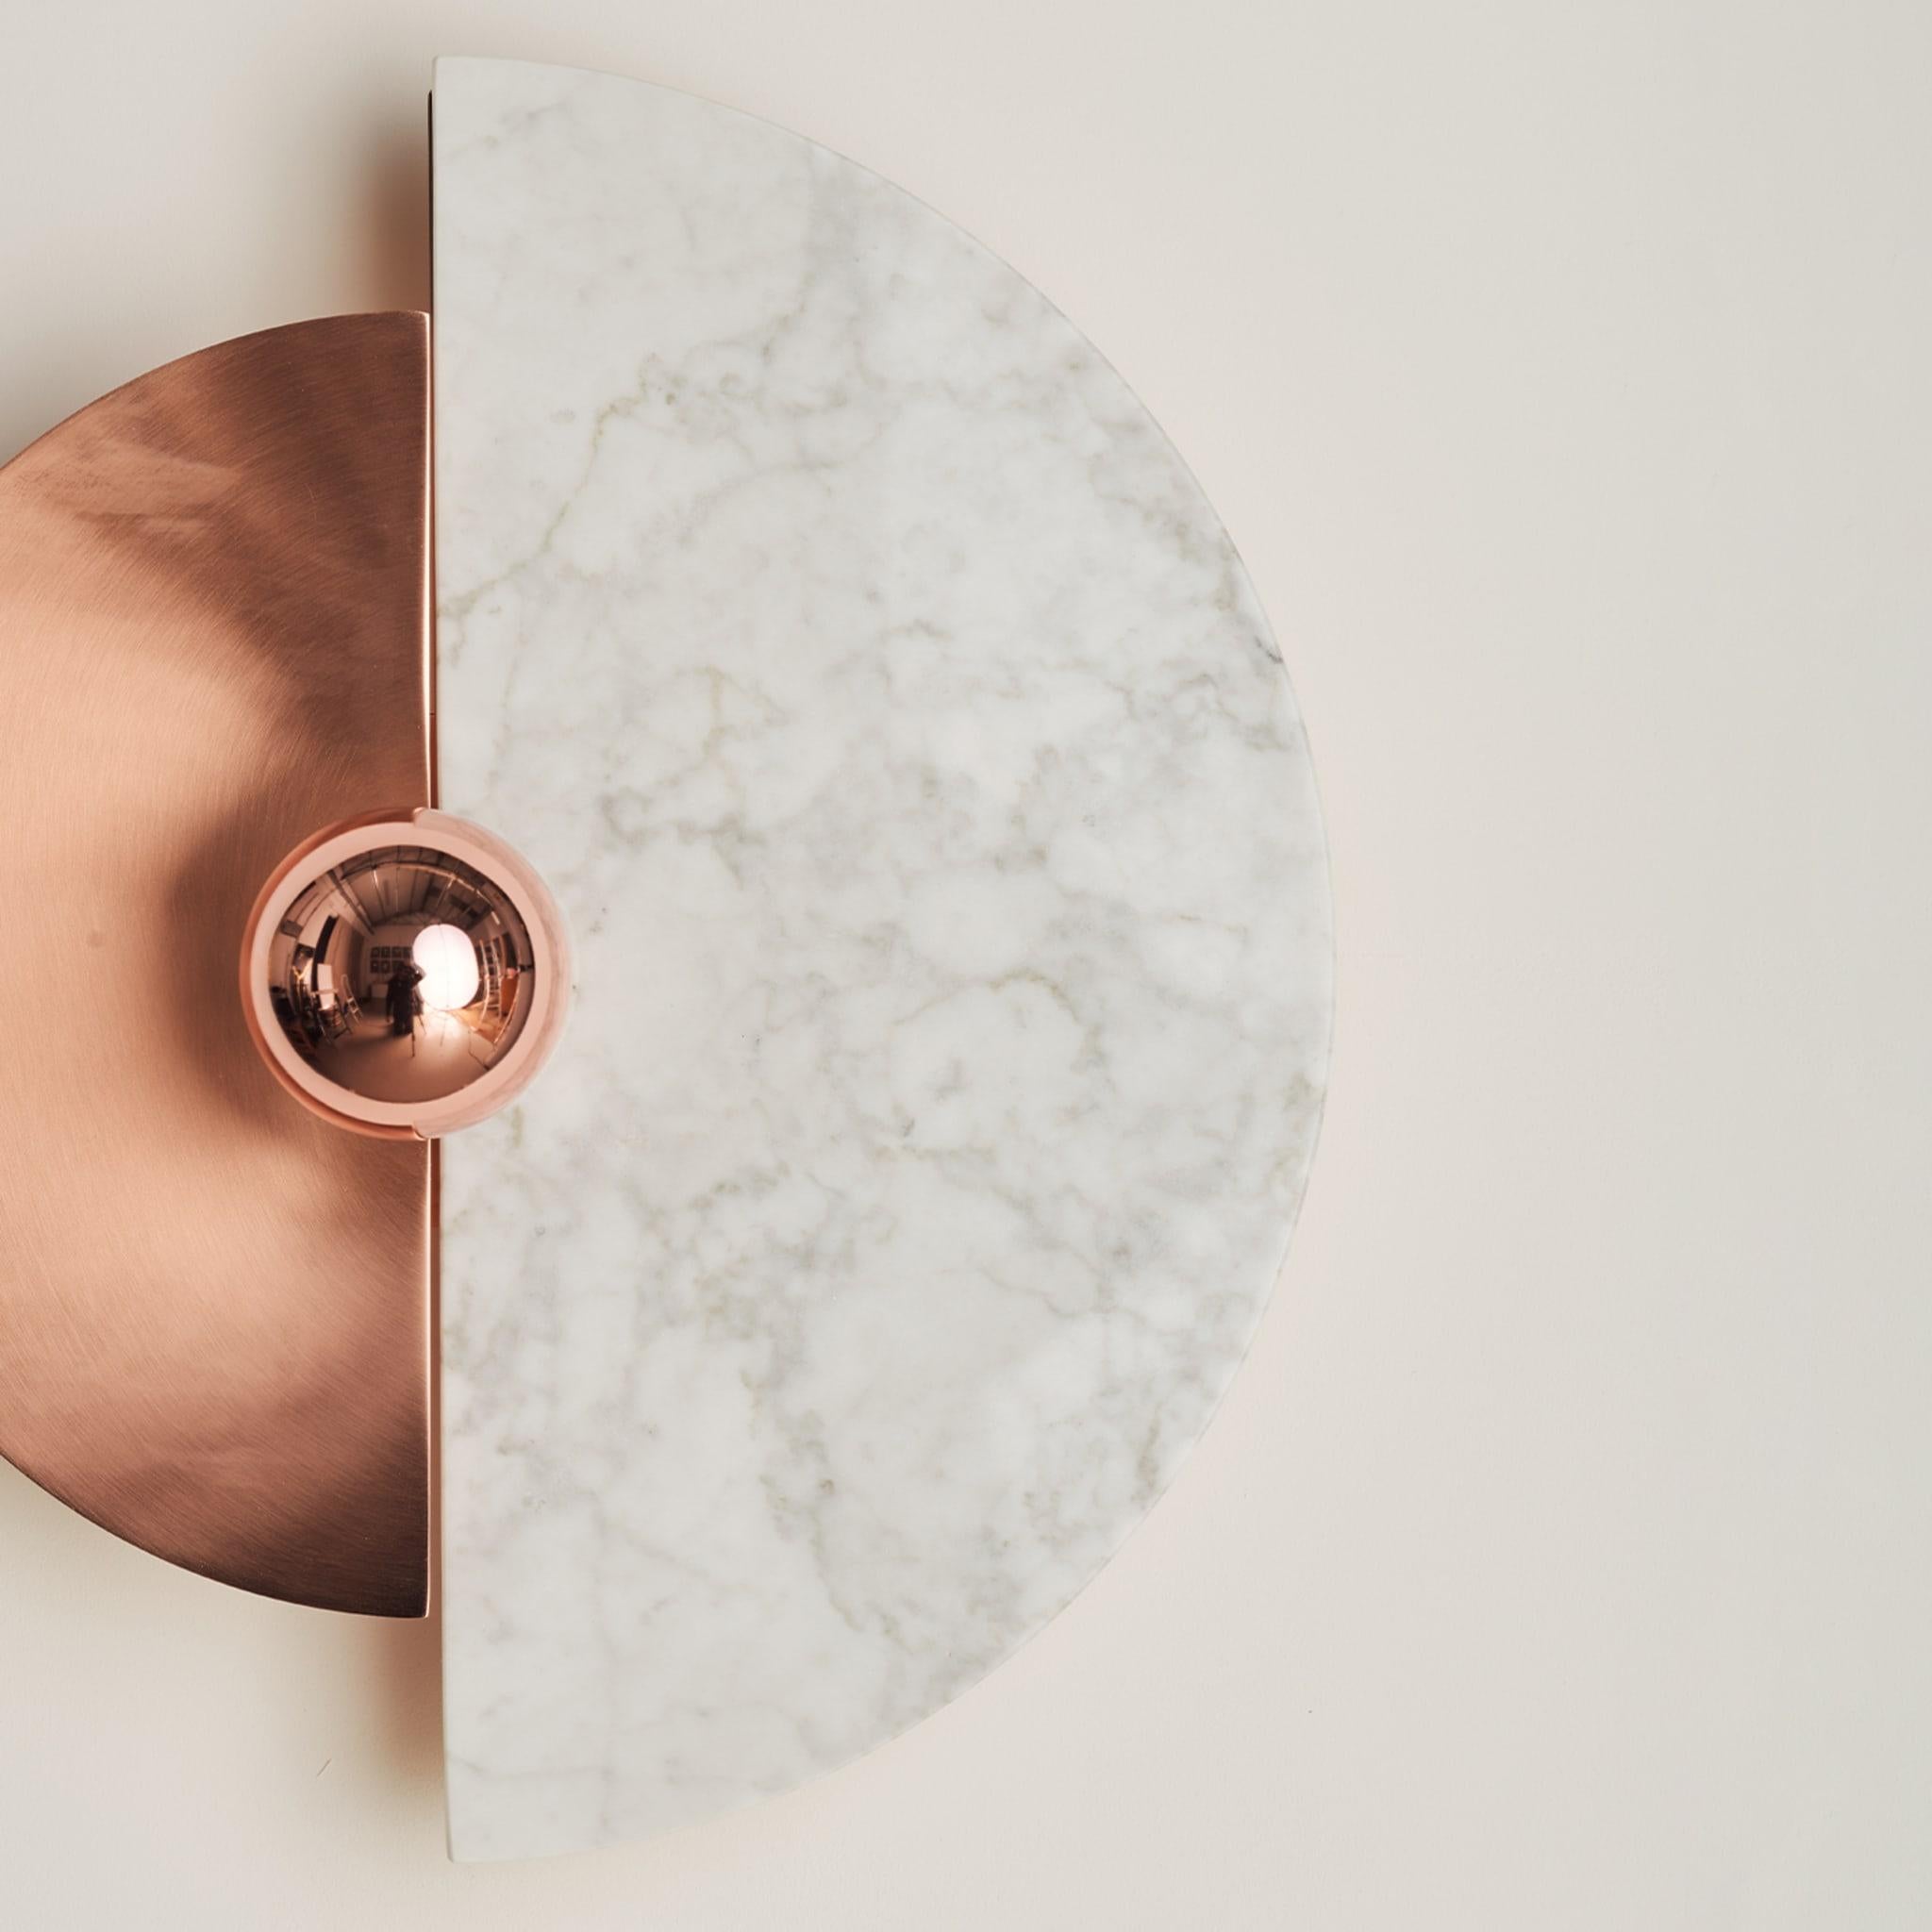 The Levante wall sconce, with its circular shape, evokes the sun. The ability to position the discs in 12 different ways creates unique interplays of light and shadow on the wall. The brass structure and disc, along with the marble disc, are